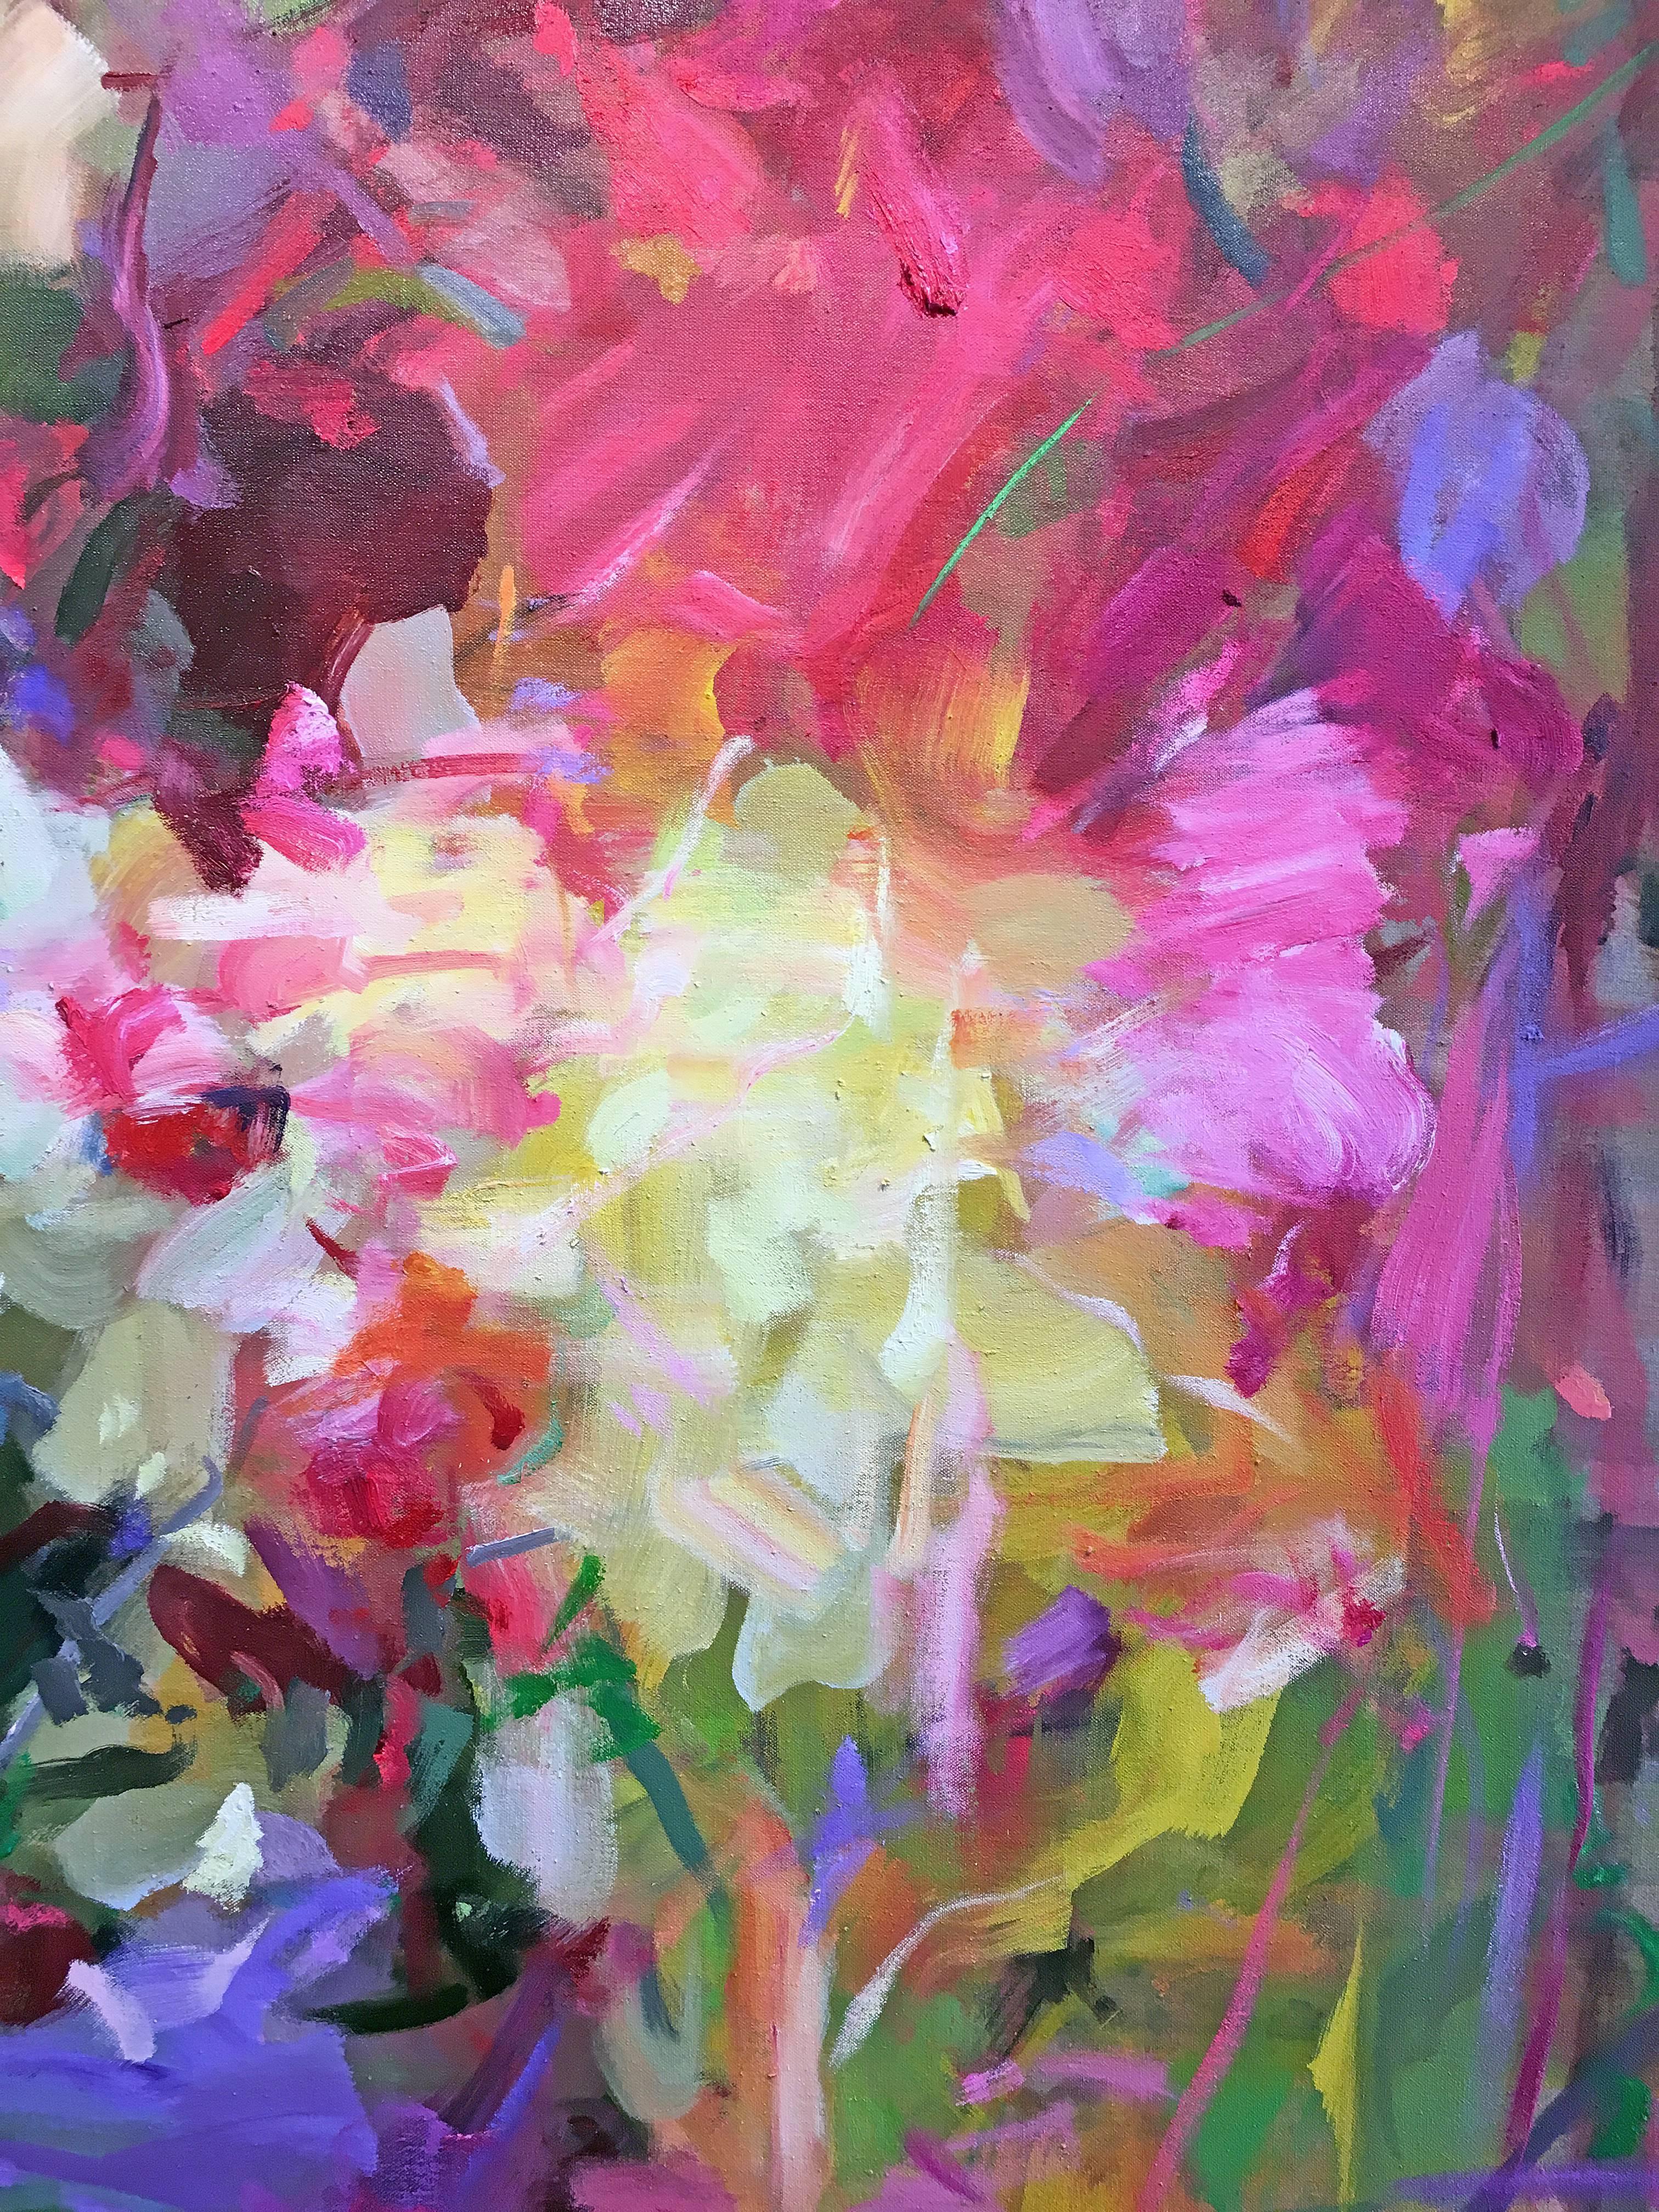 'Unveiling' 2017-18 by Chinese/Canadian artist Yangyang Pan. Oil on linen, 60 x 60 in. This beautiful abstract-impressionistic garden landscape painting incorporates large gestural brush strokes in rich colors of purple, green, red, orange, pink,